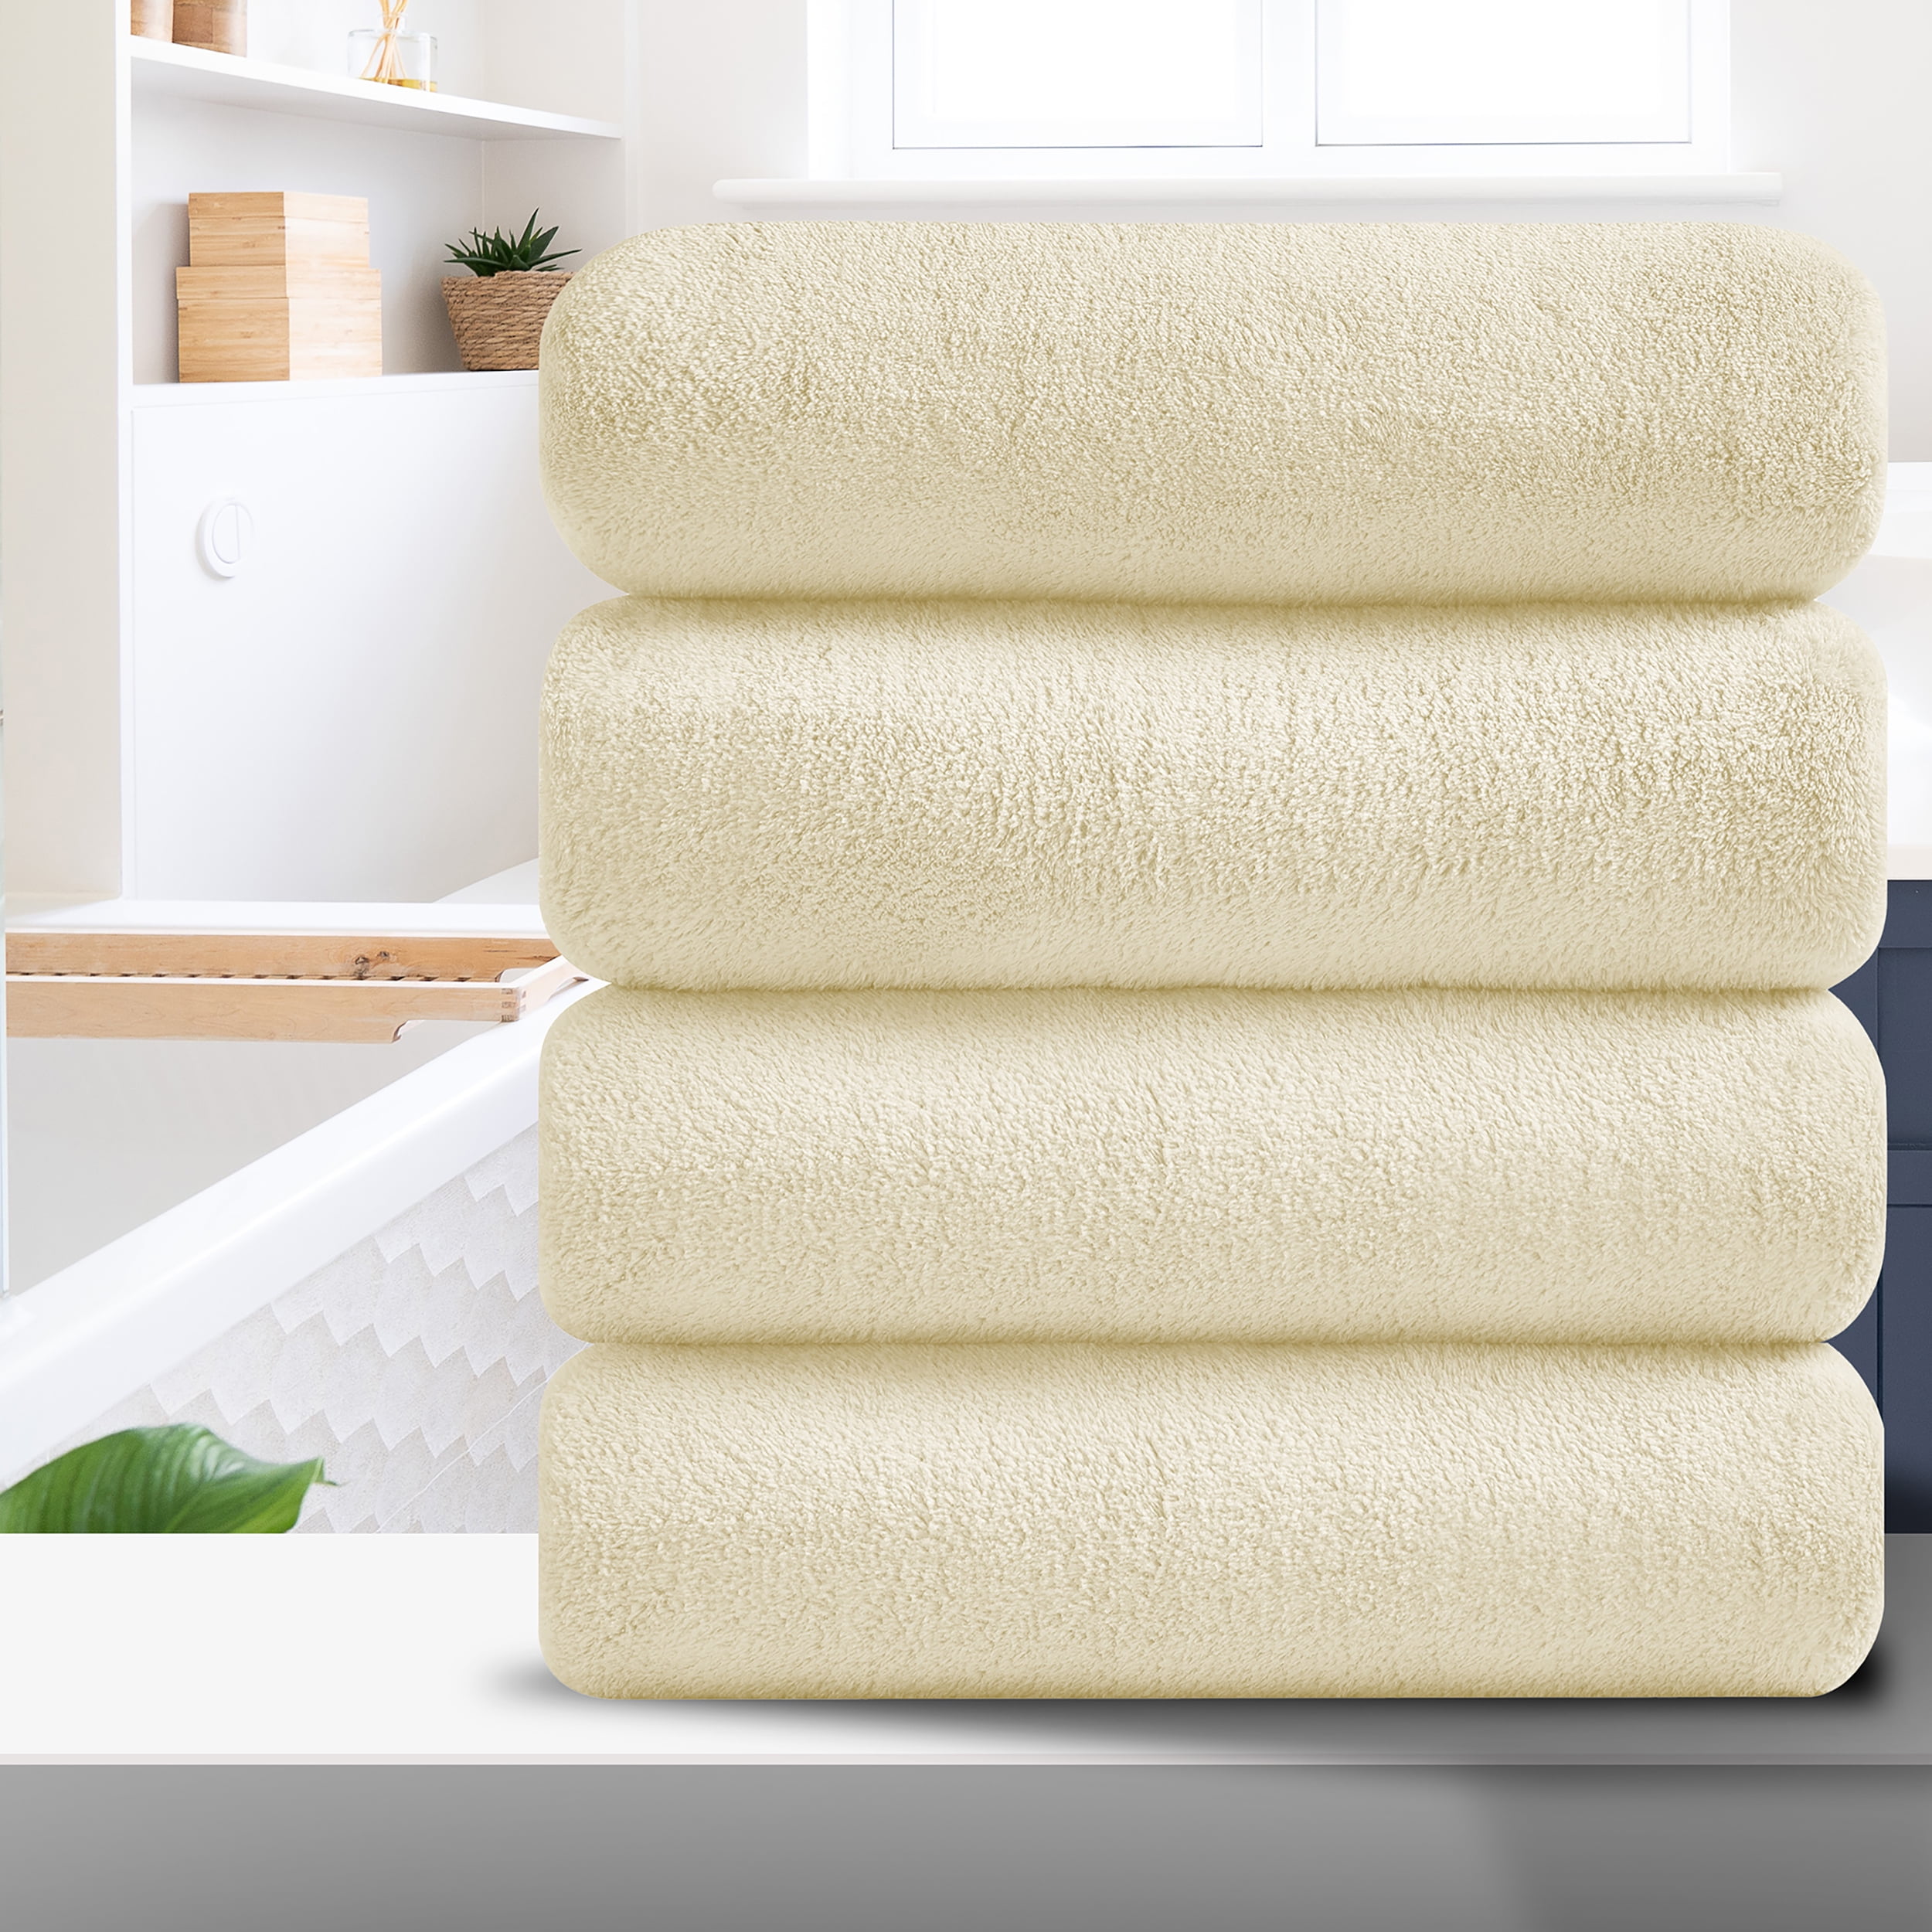 Smuge 4 Pack Bath Towels Extra Large 35x 70Highly Absorbent